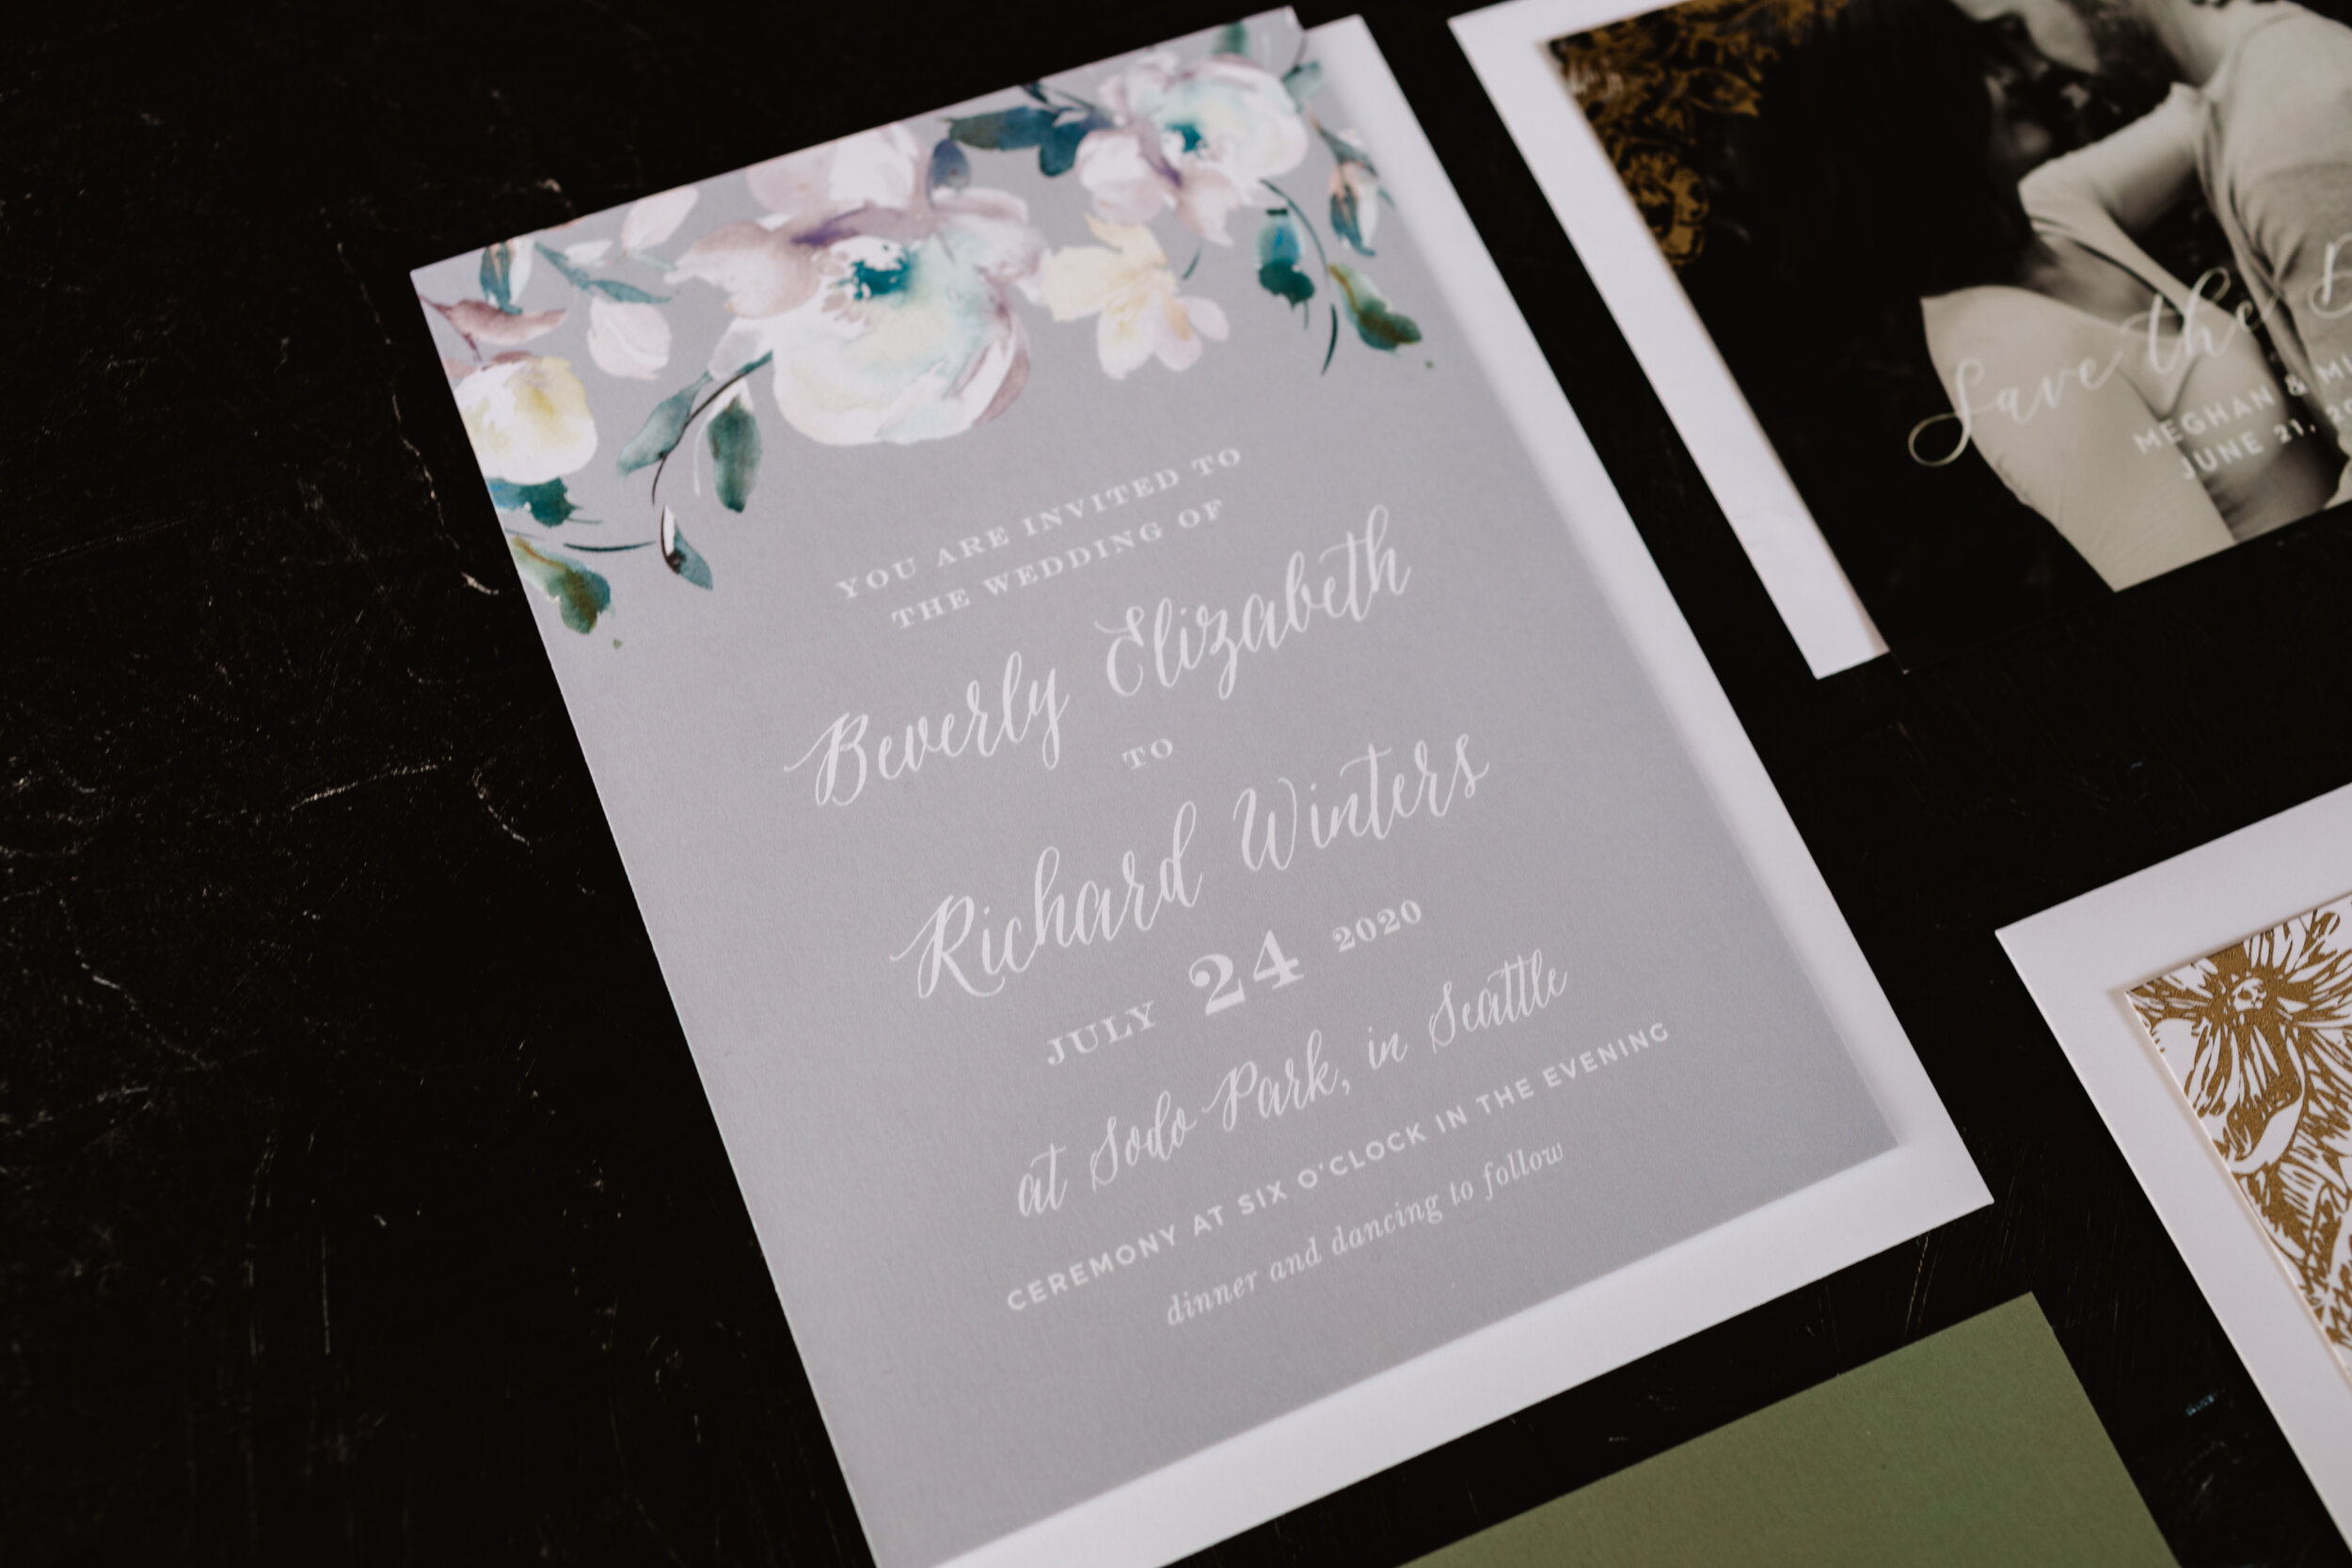 Basic Invite, Wedding Invitations, Save the Dates, Save the Date Maganets, Emily Wehner Photography-23.jpg